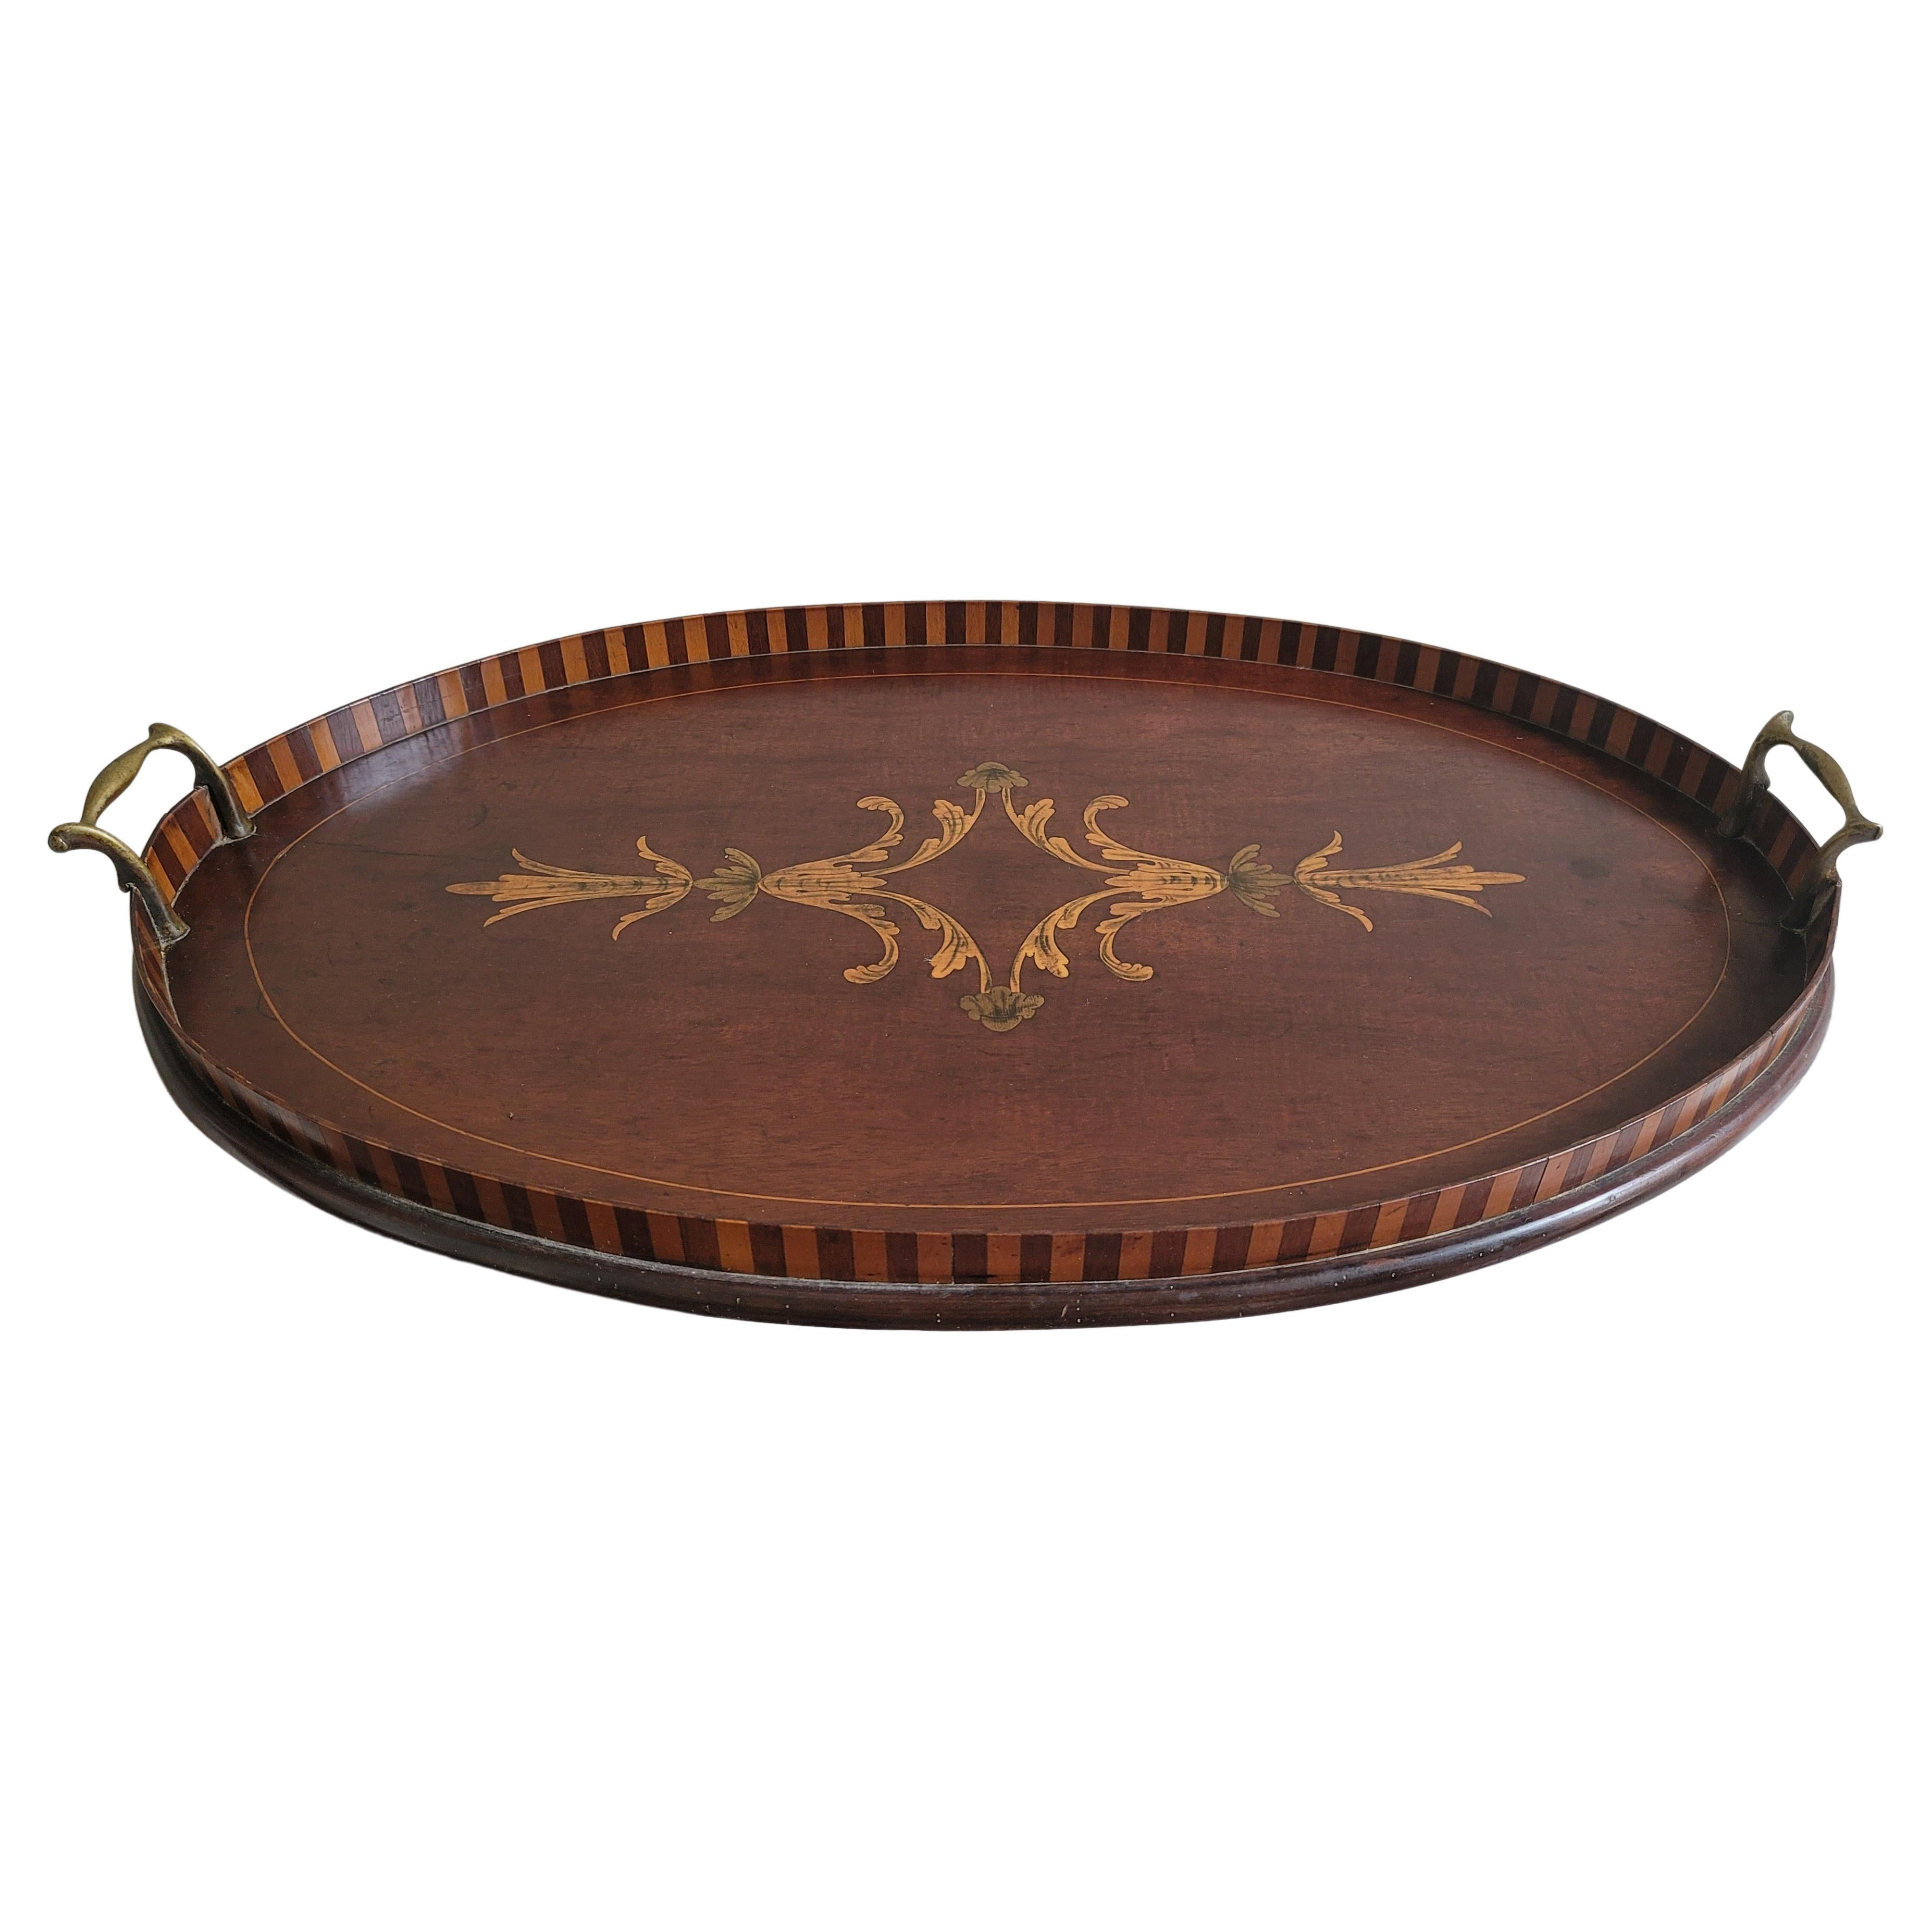 A Large Victorian period George III style Inlaid Mahogany two handle galleried oval tray. Solid brass handles.
Good antique condition with patina. Measures 26